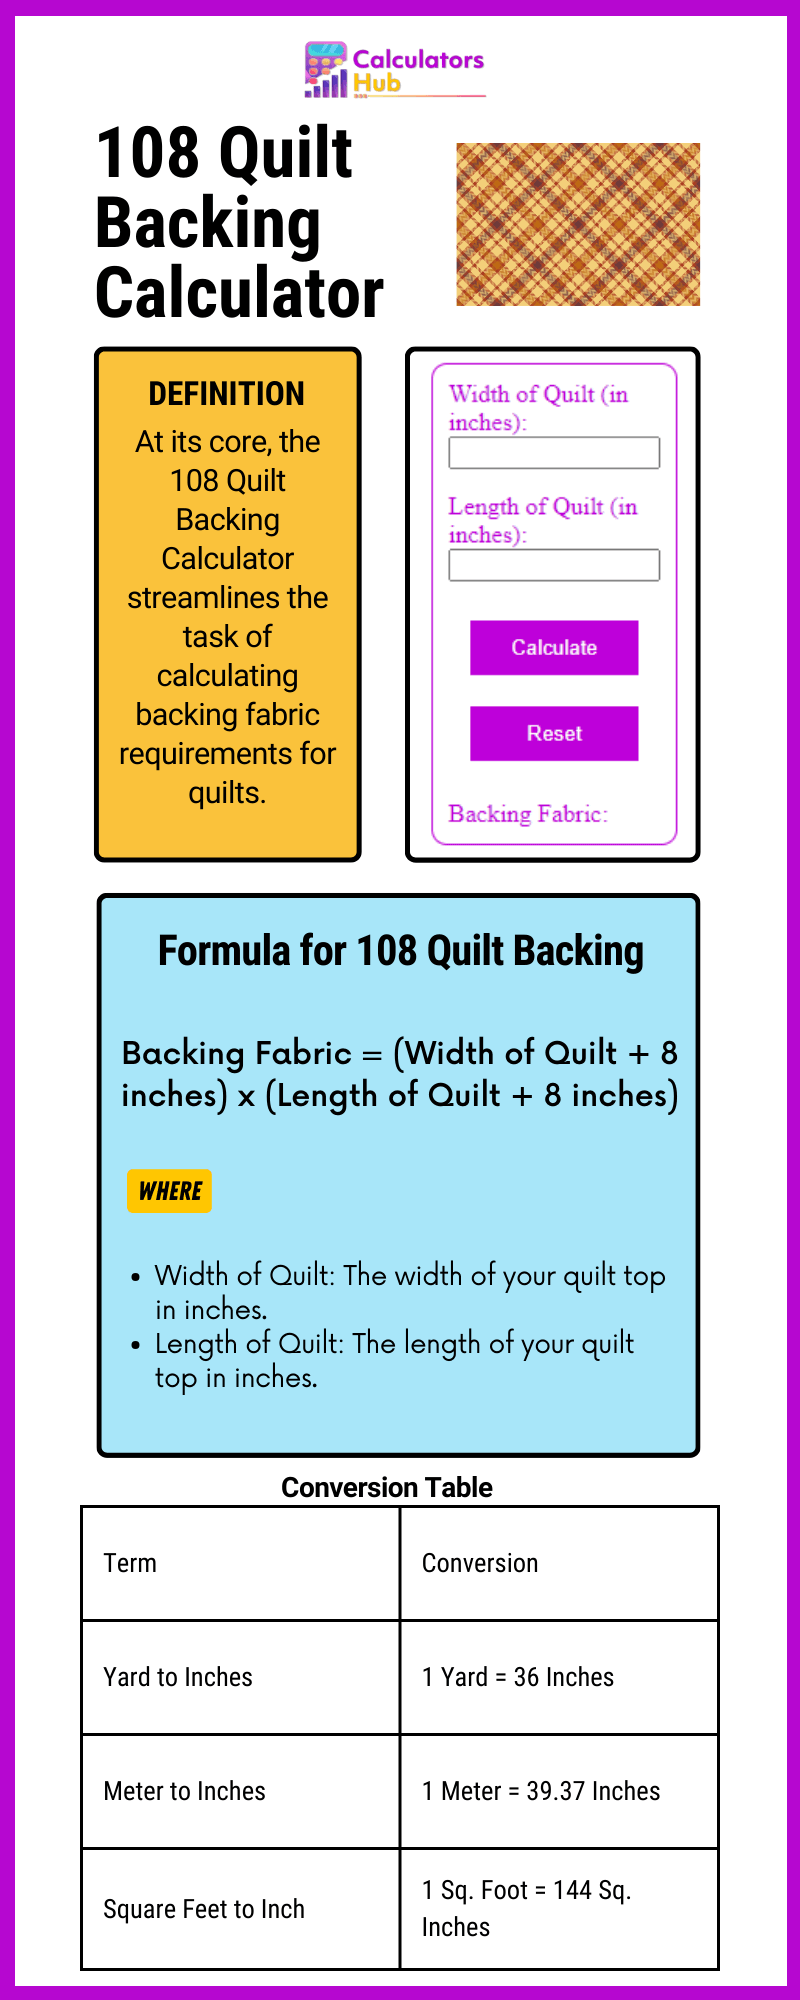 108 Quilt Backing Calculator